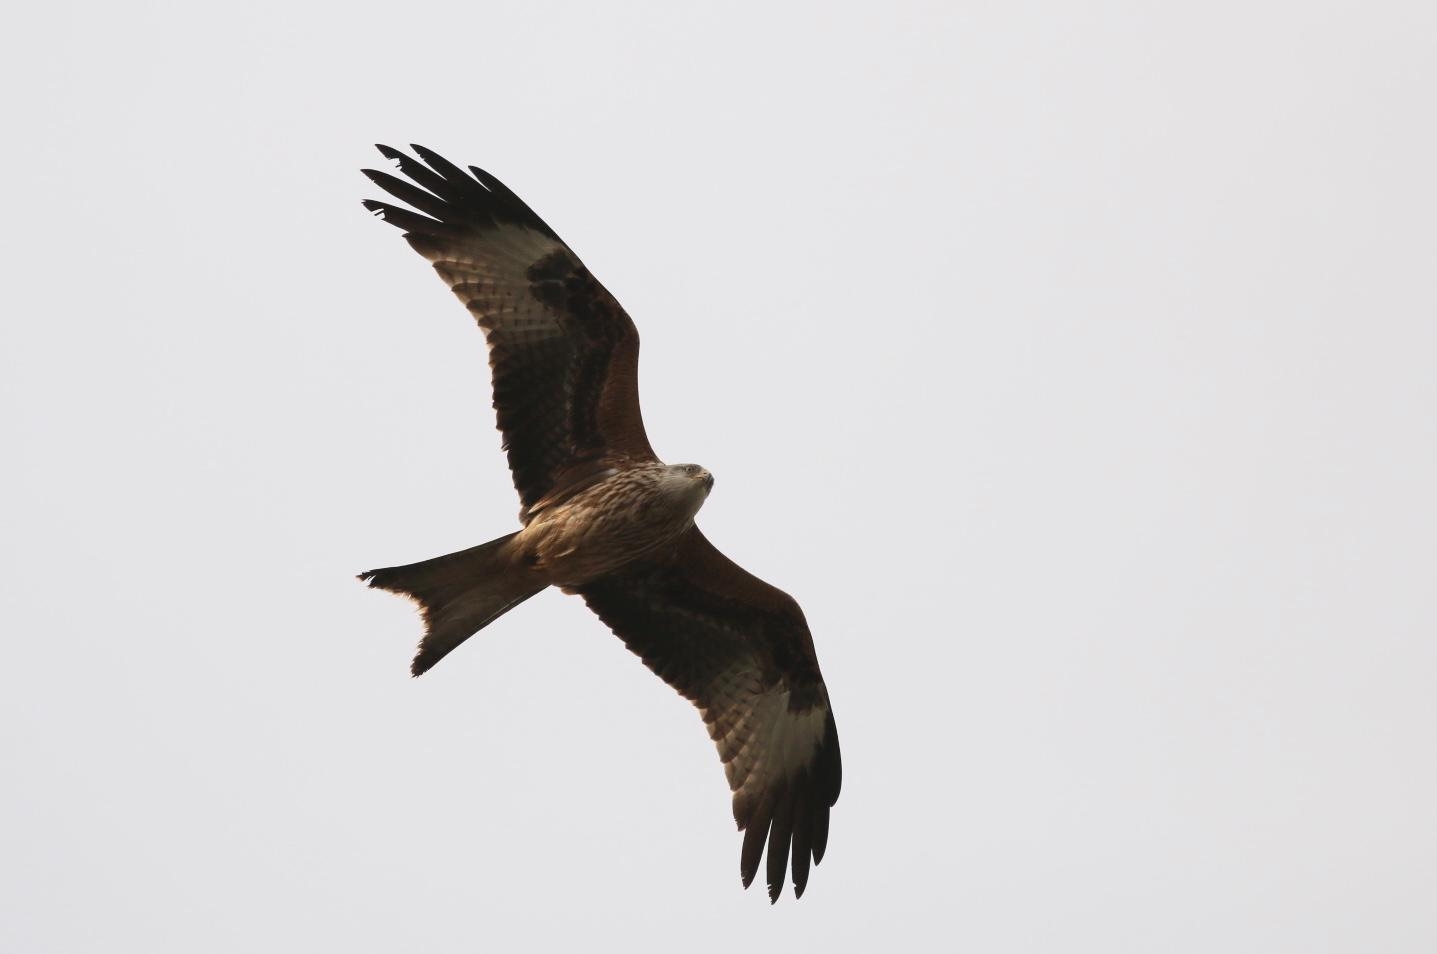 Red Kites are about